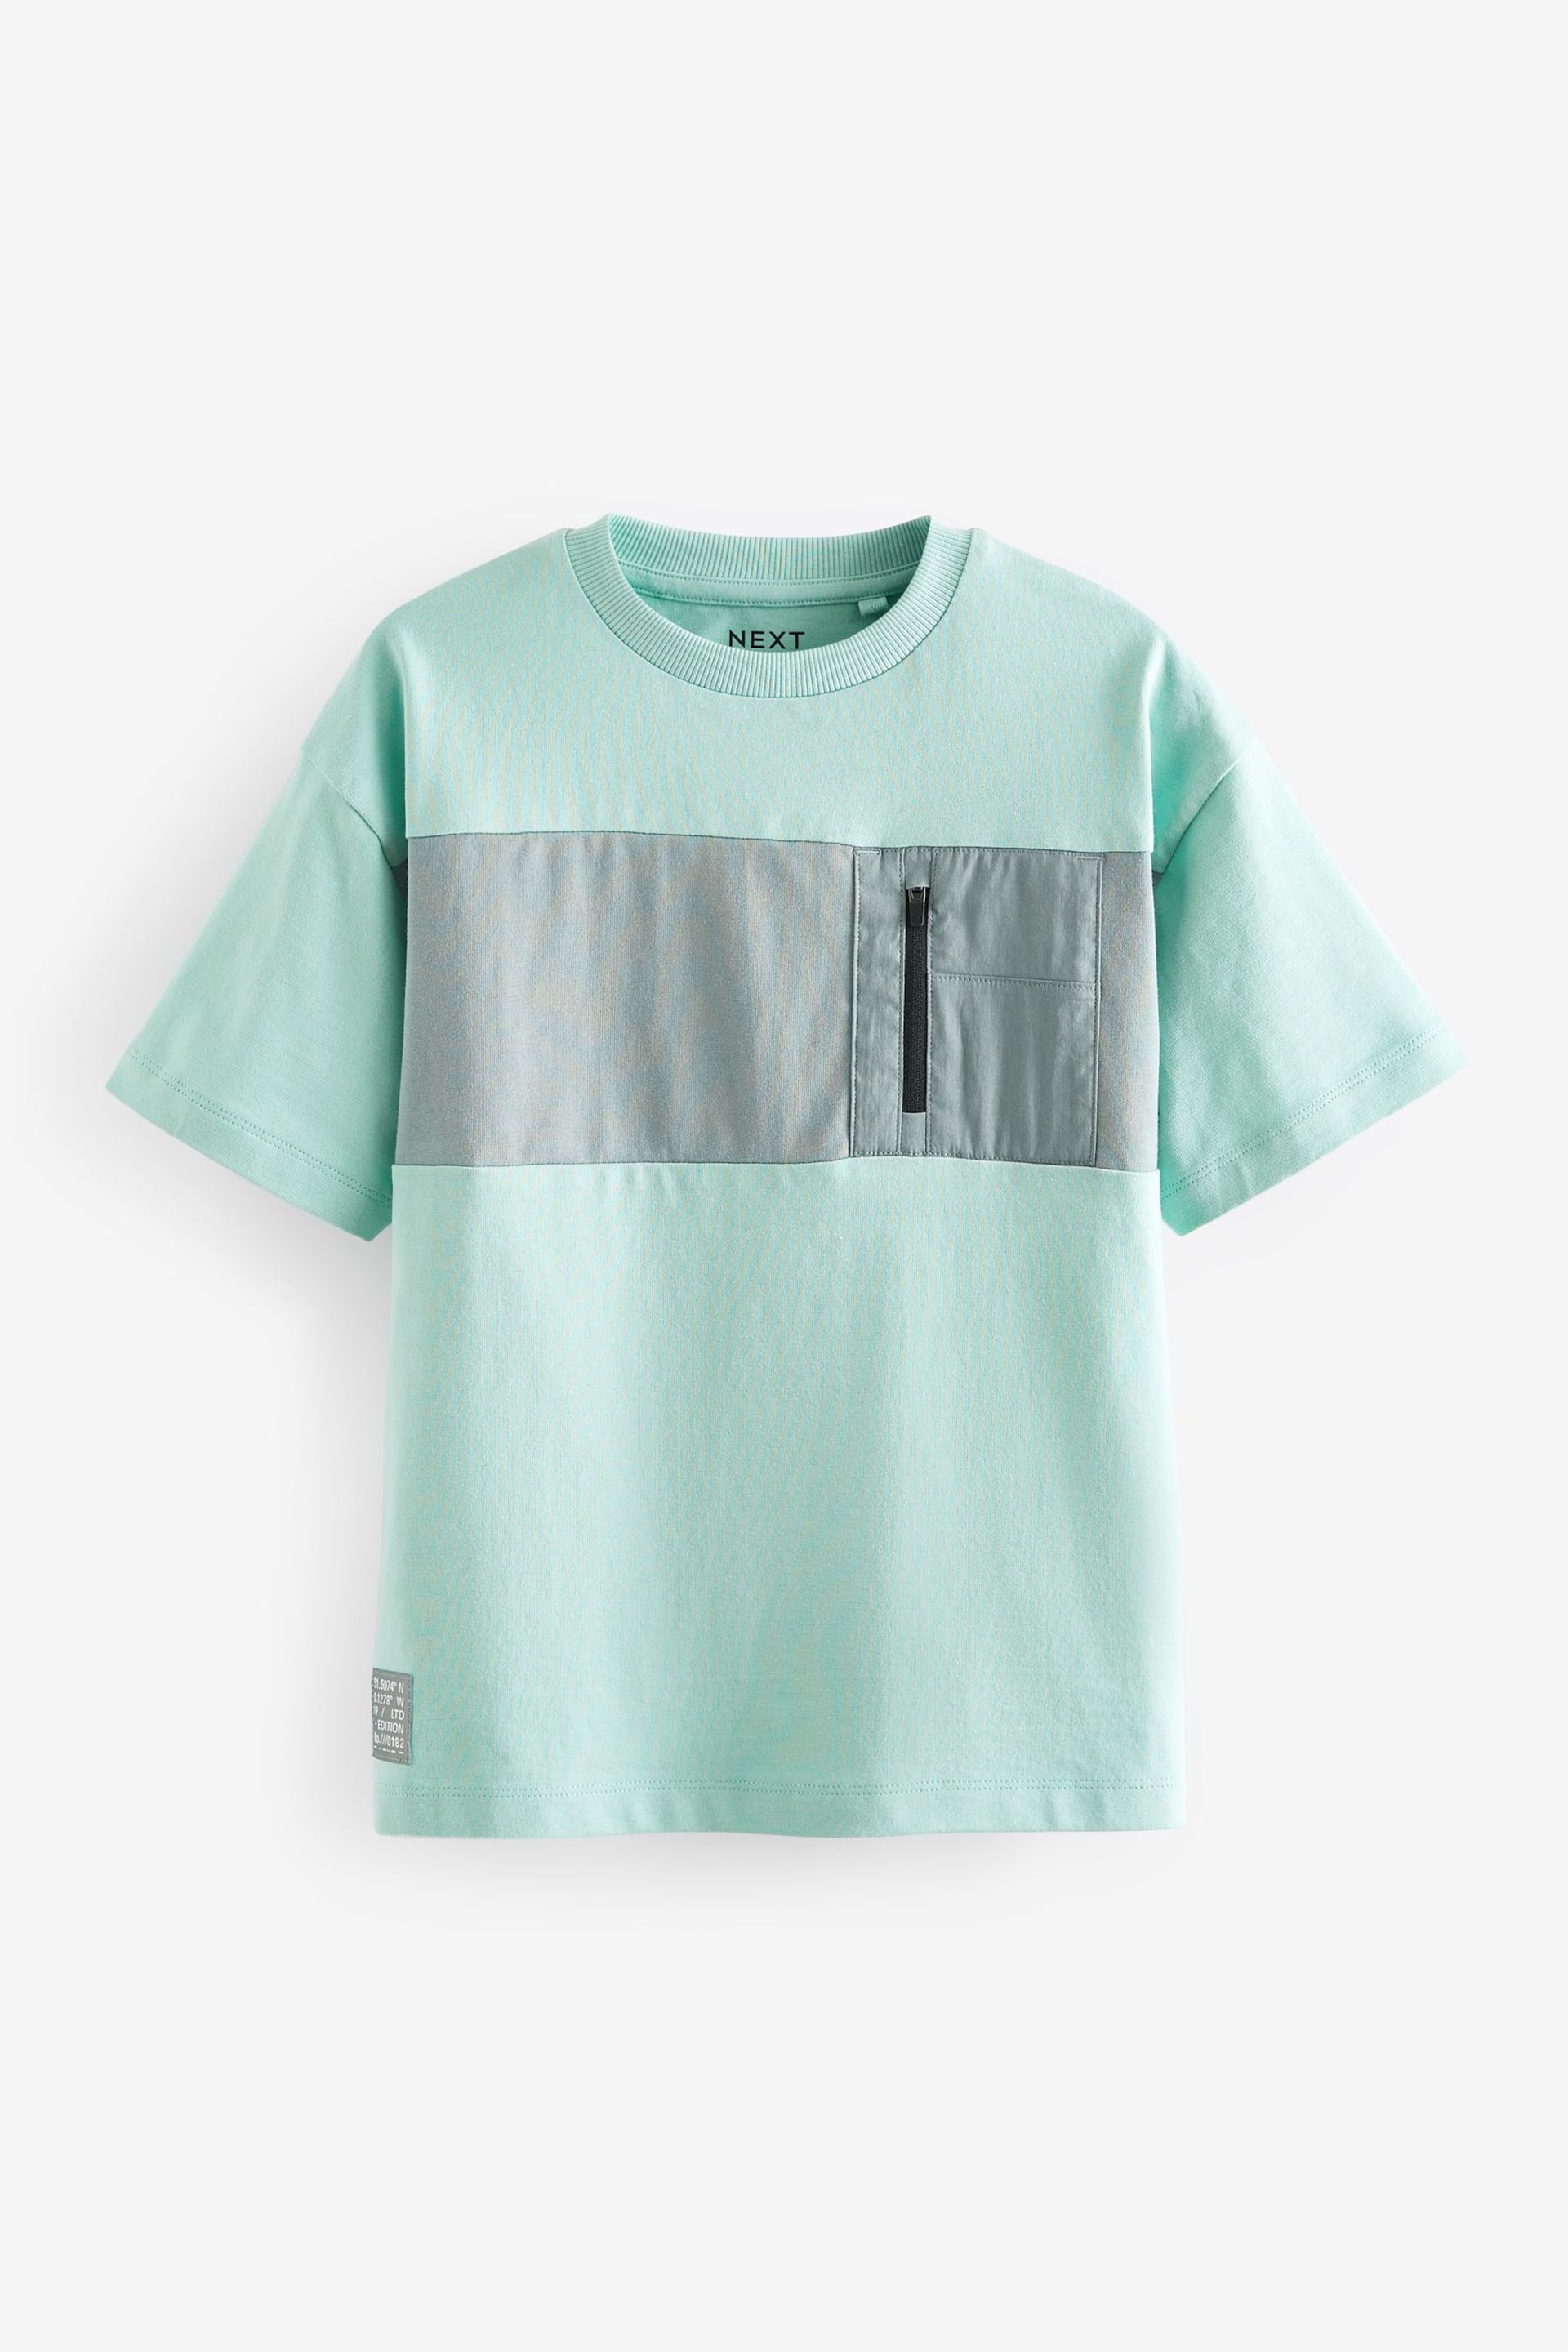 Mineral Blue Short Sleeve Utility T-Shirt (3-16yrs) - Image 1 of 3